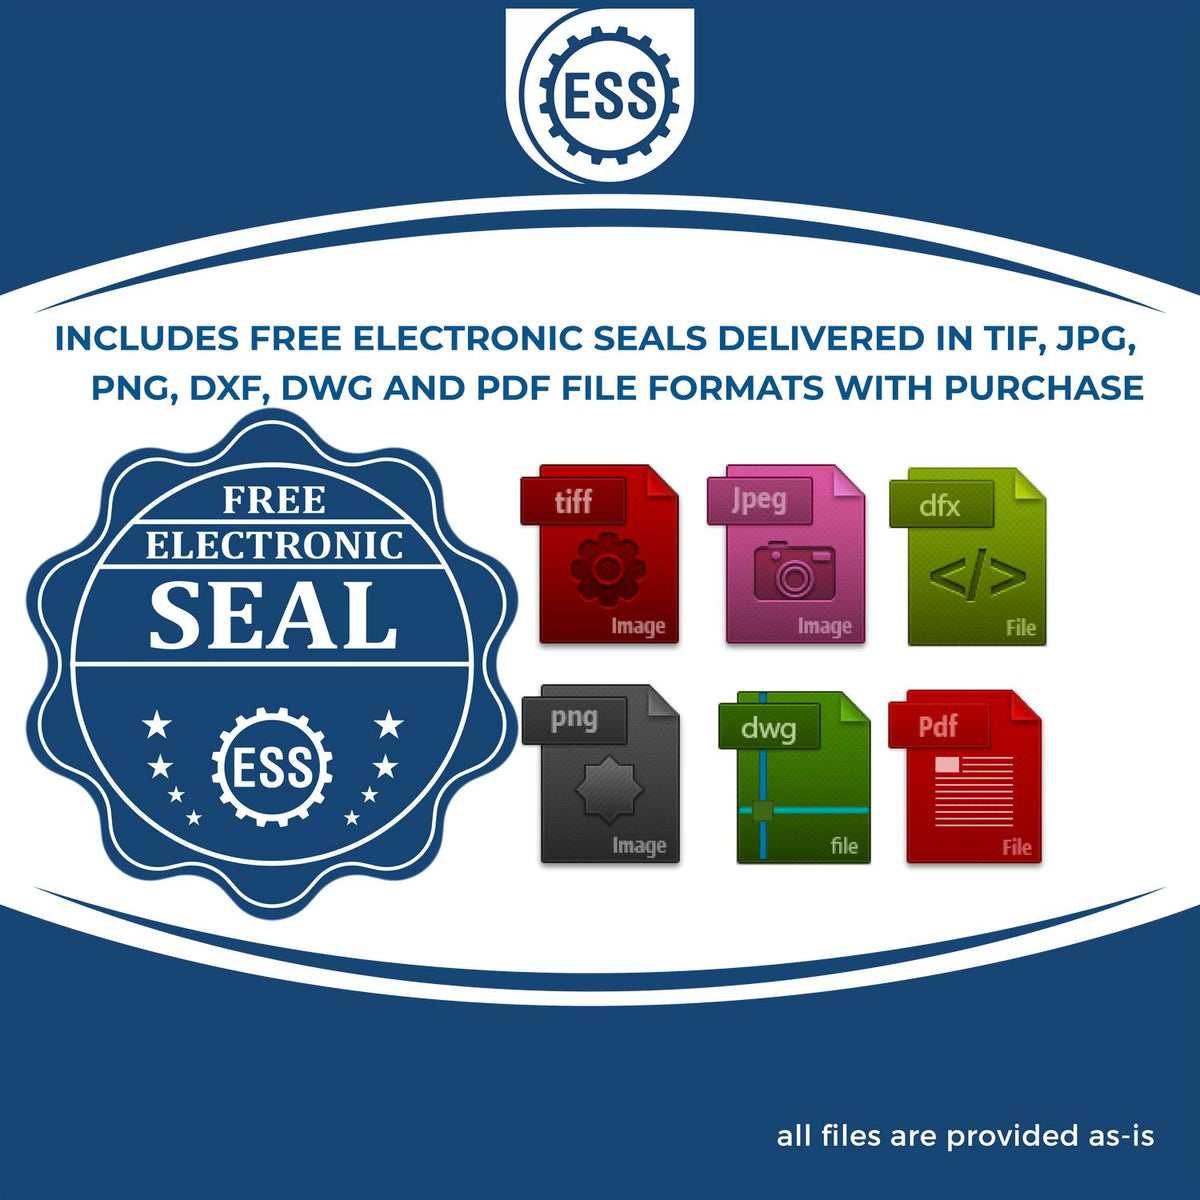 An infographic for the free electronic seal for the Hybrid Wyoming Land Surveyor Seal illustrating the different file type icons such as DXF, DWG, TIF, JPG and PNG.